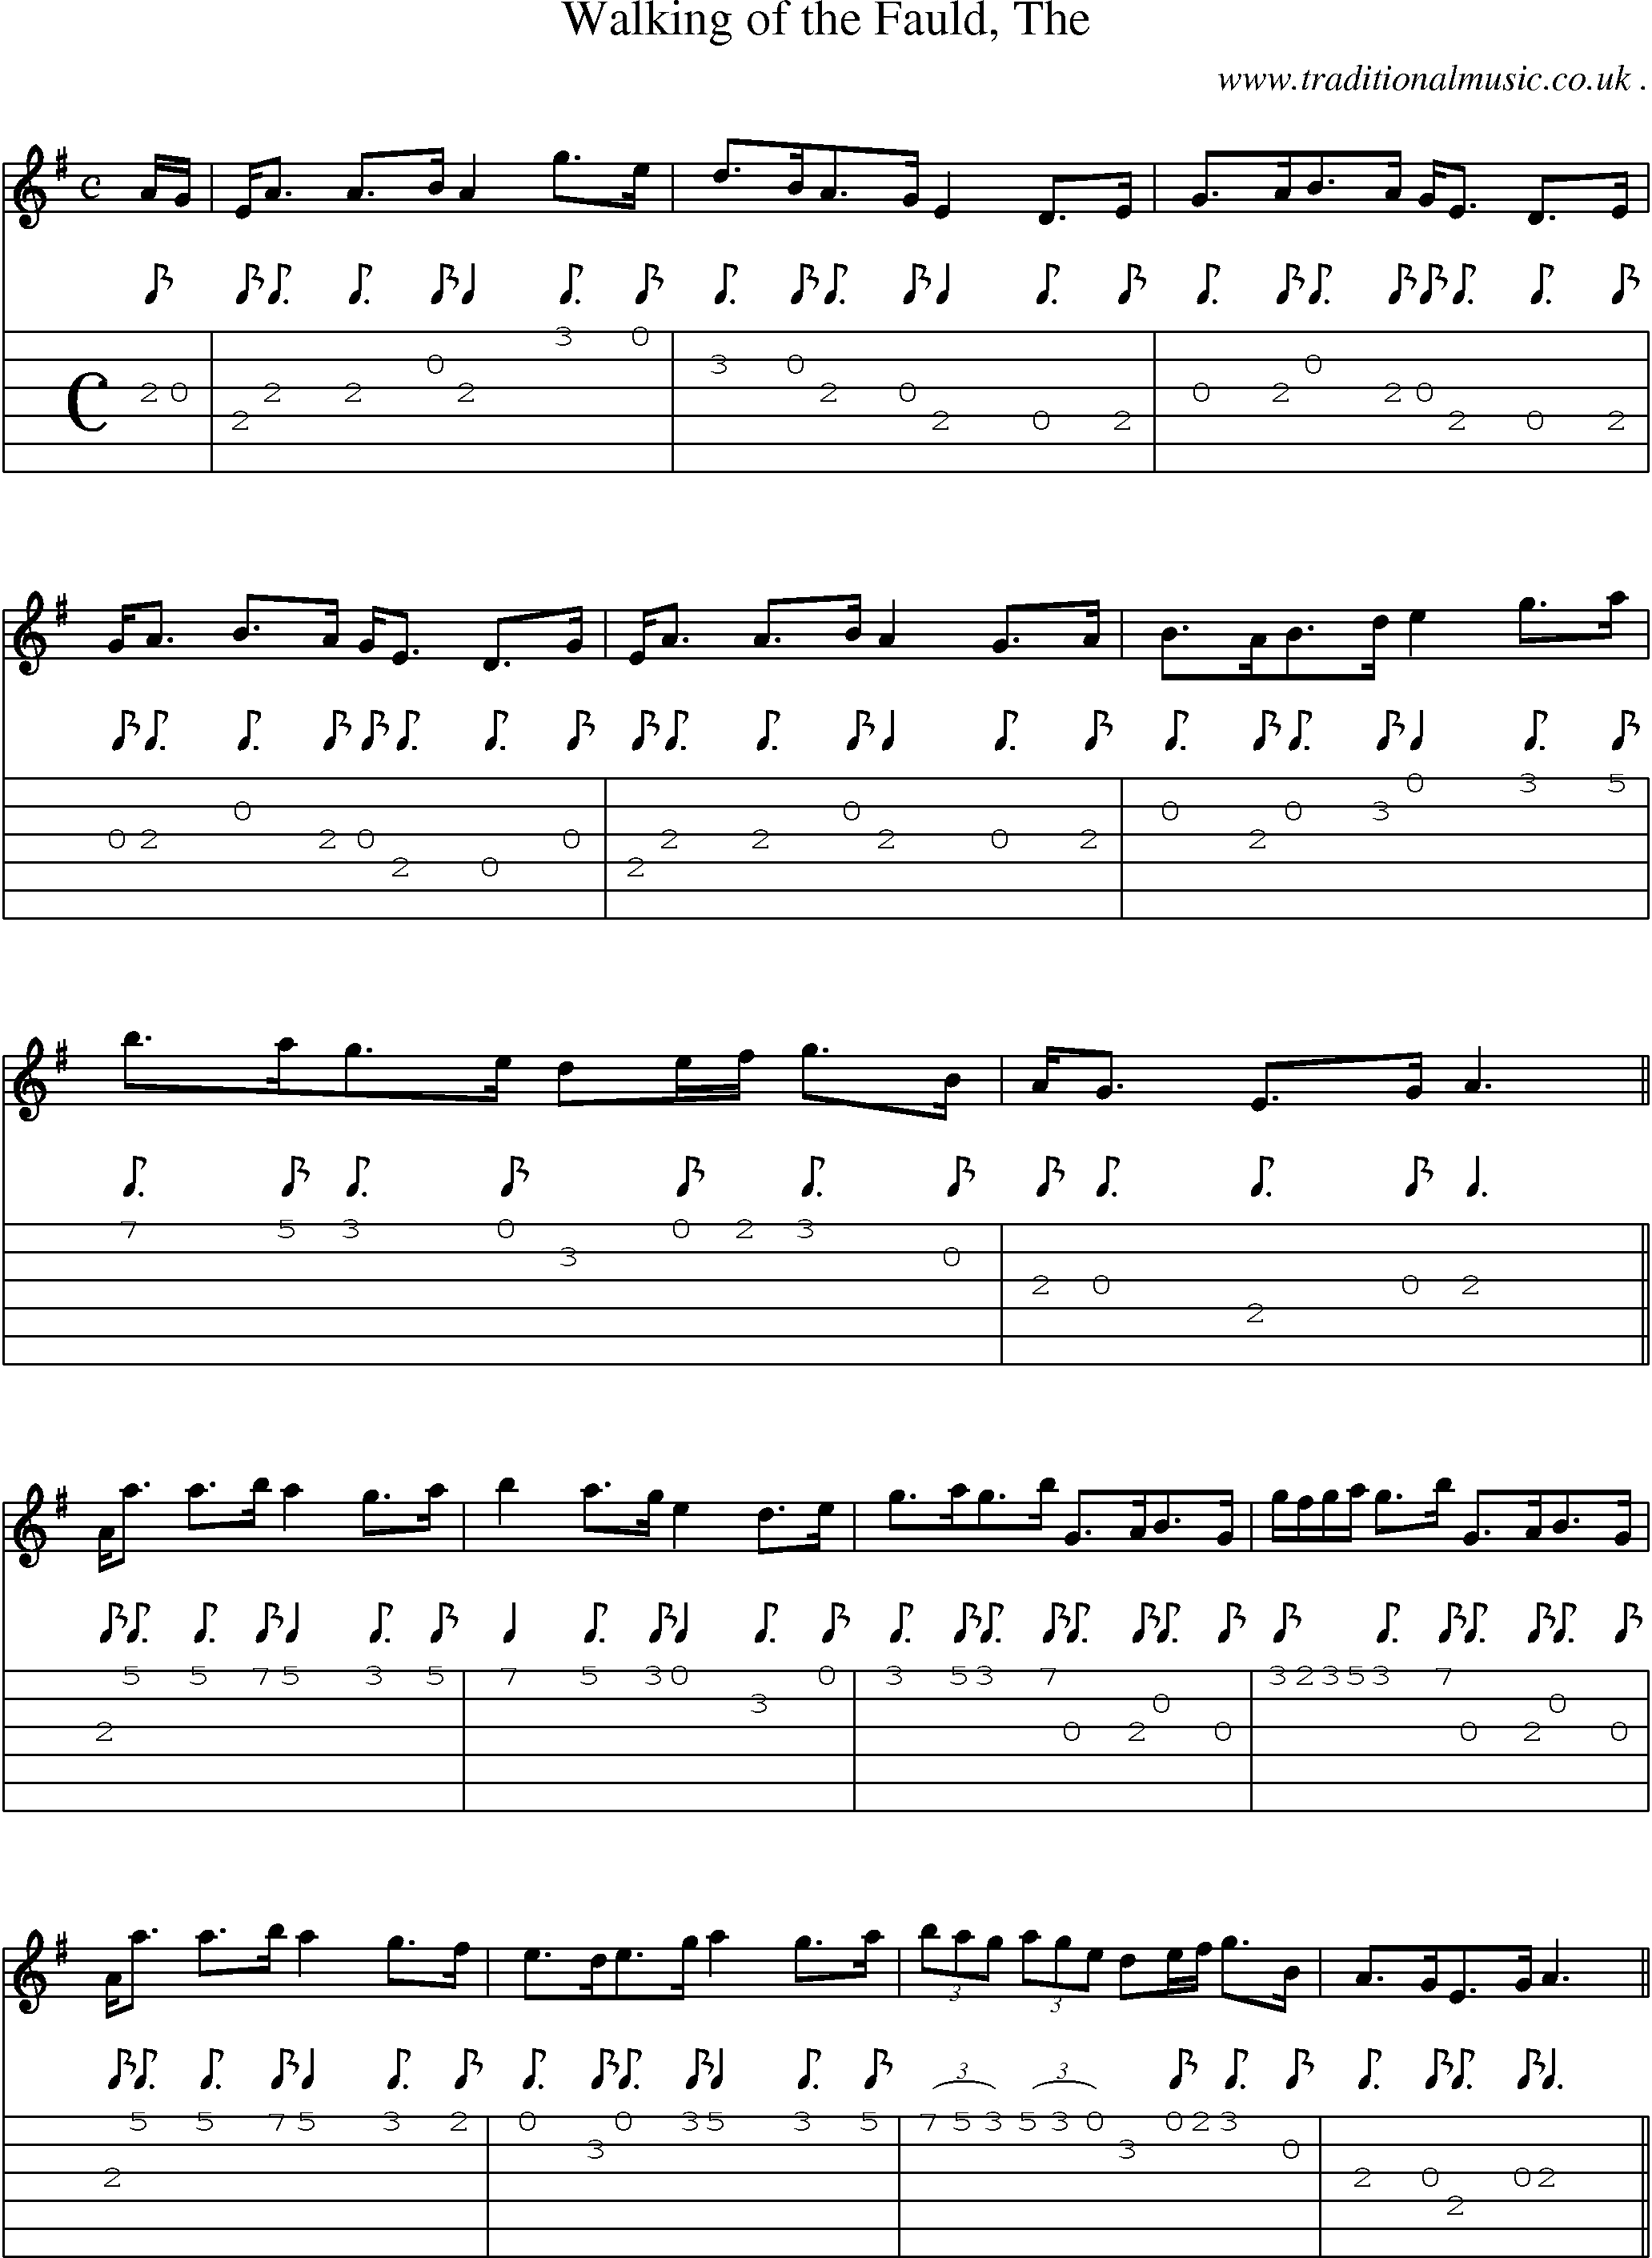 Sheet-music  score, Chords and Guitar Tabs for Walking Of The Fauld The